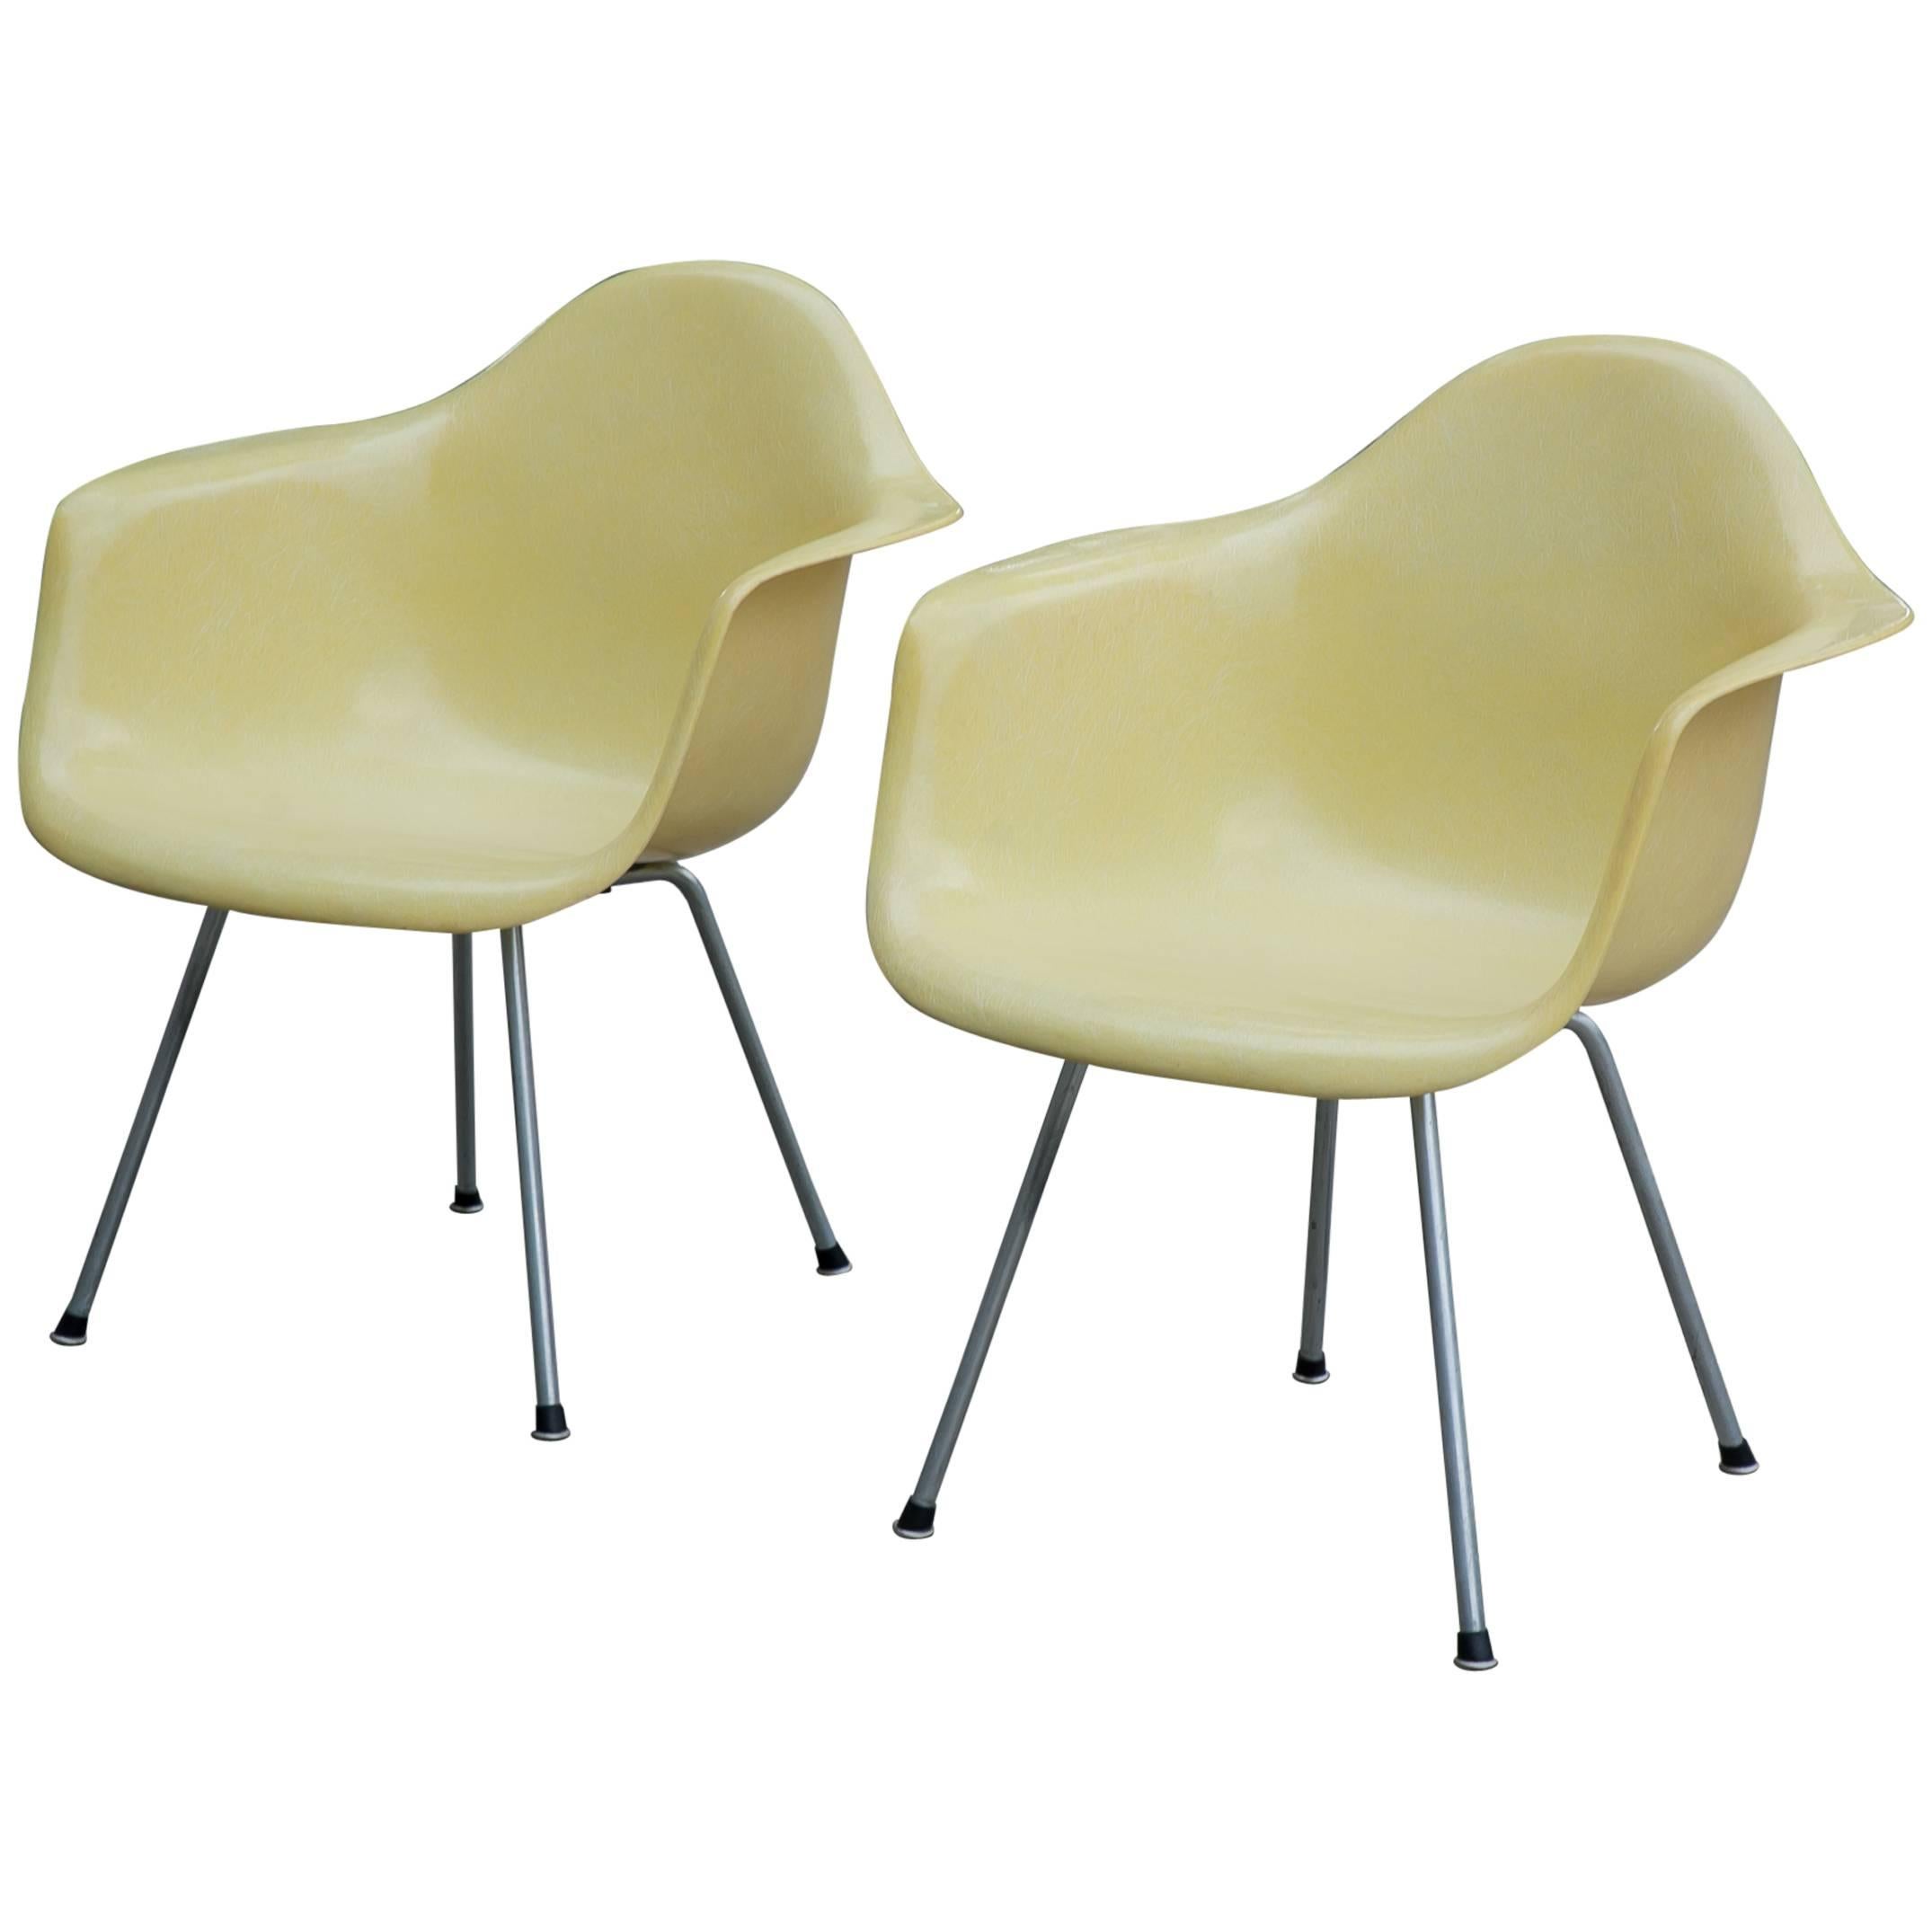 Early Pair of Eames Transitional Zenith Style Fiberglass Lounge Chairs For Sale